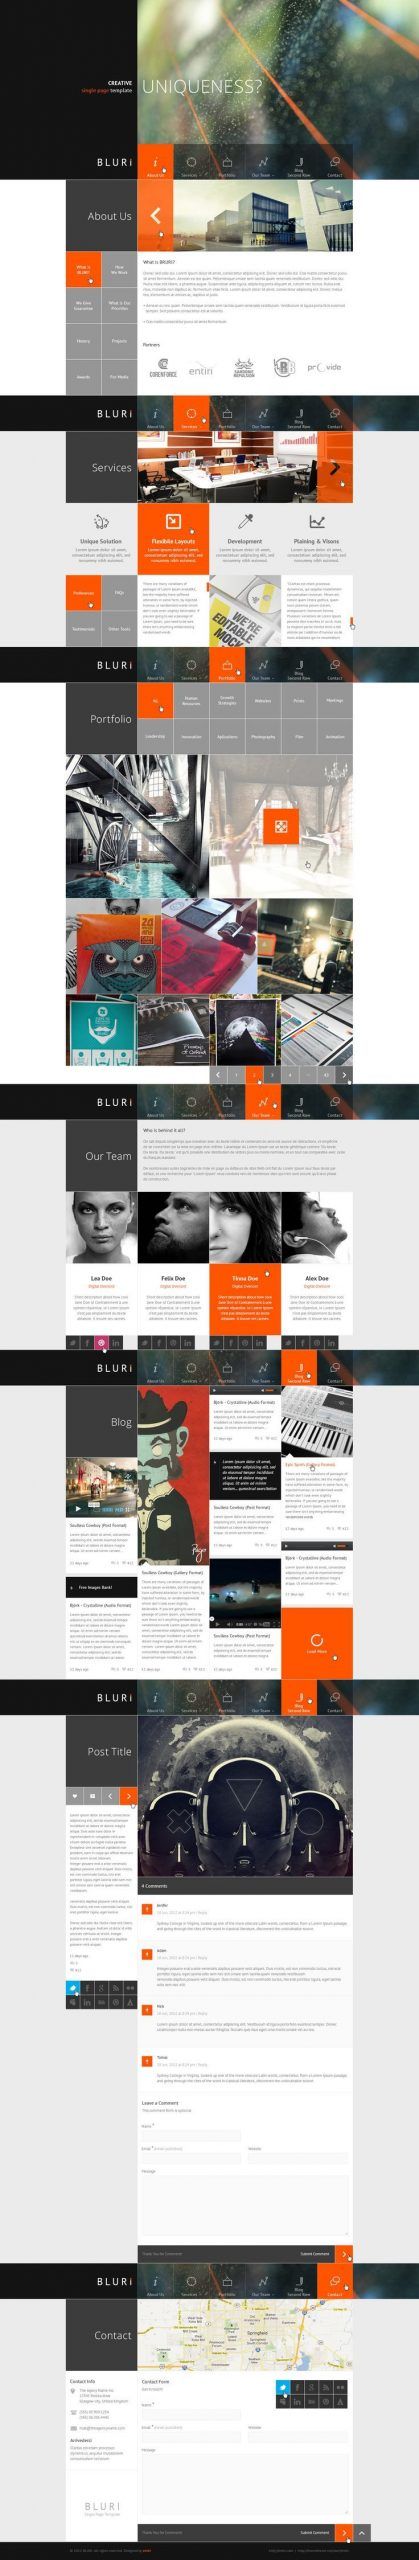 themeforest.net/... Get this template from: themeforest.net/